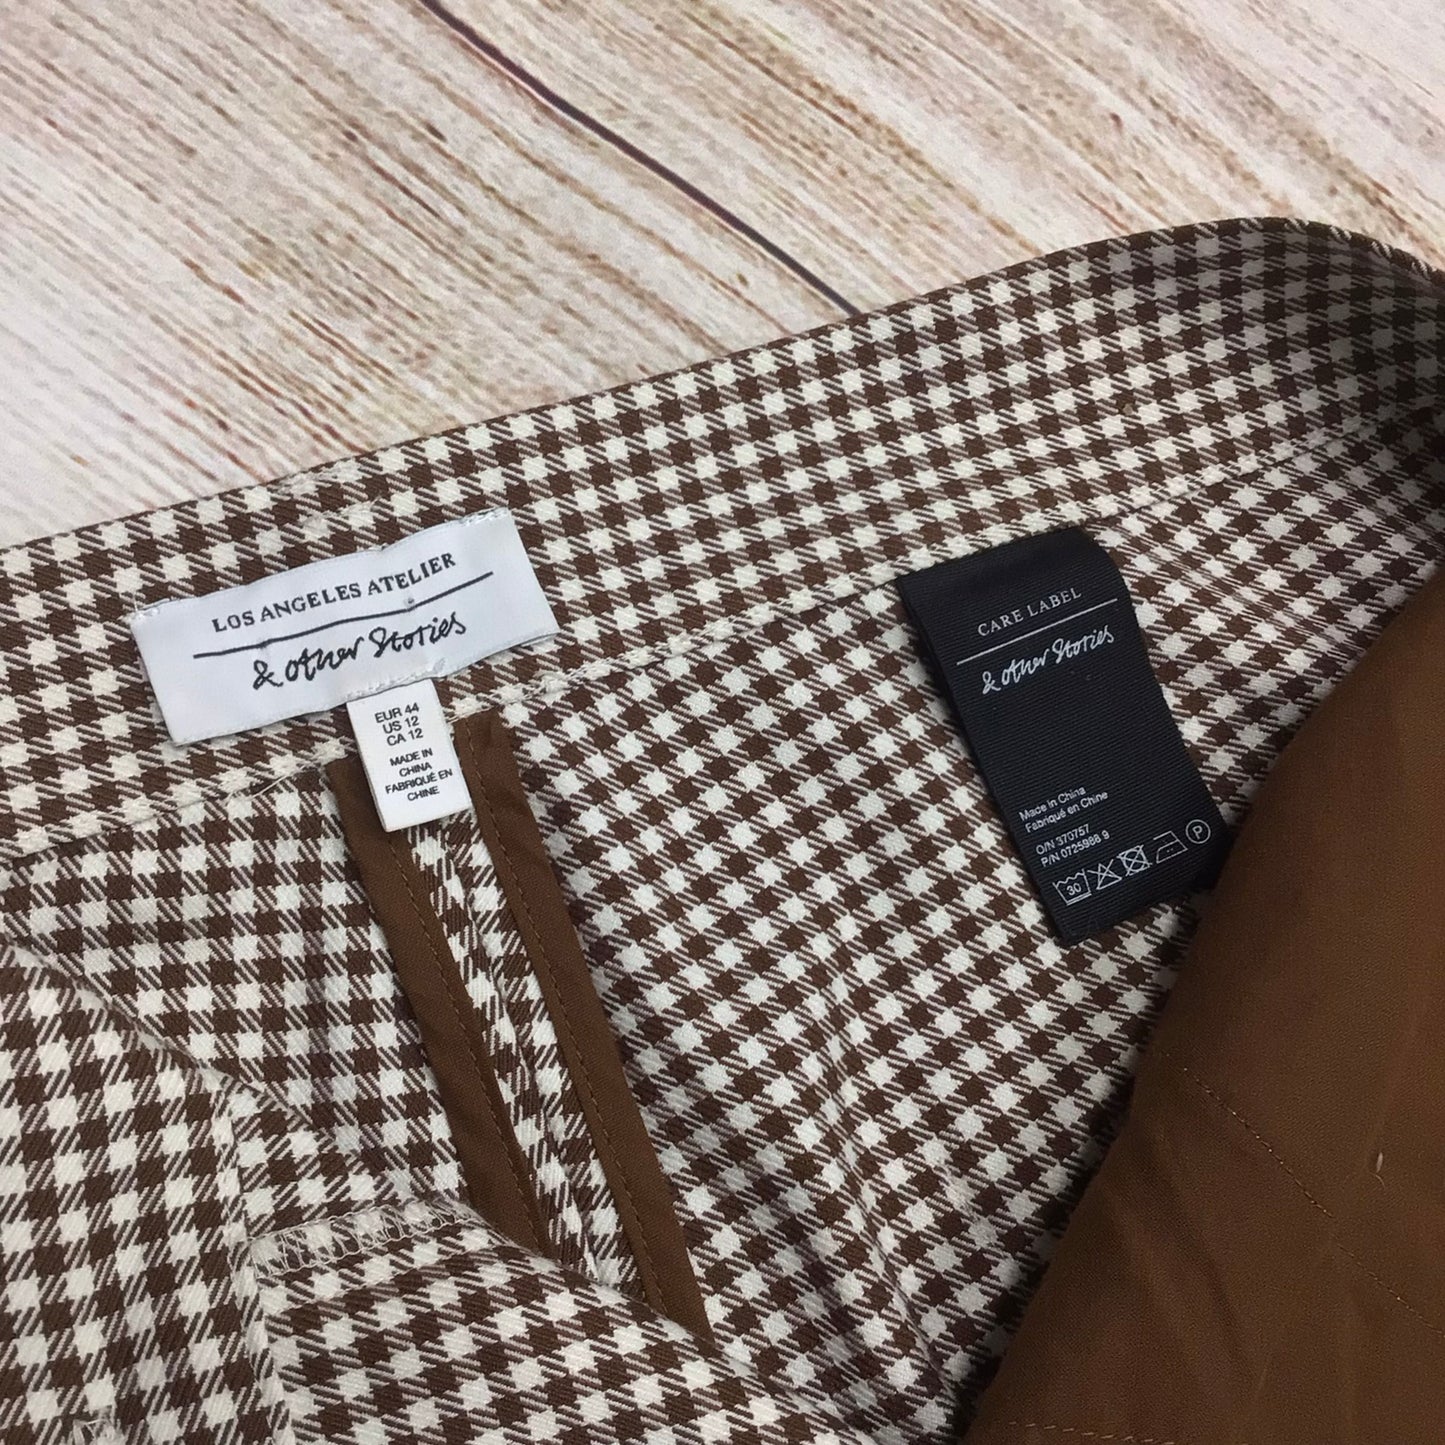 & Other Stories LA Atelier Brown & White Checked Trousers Size 16